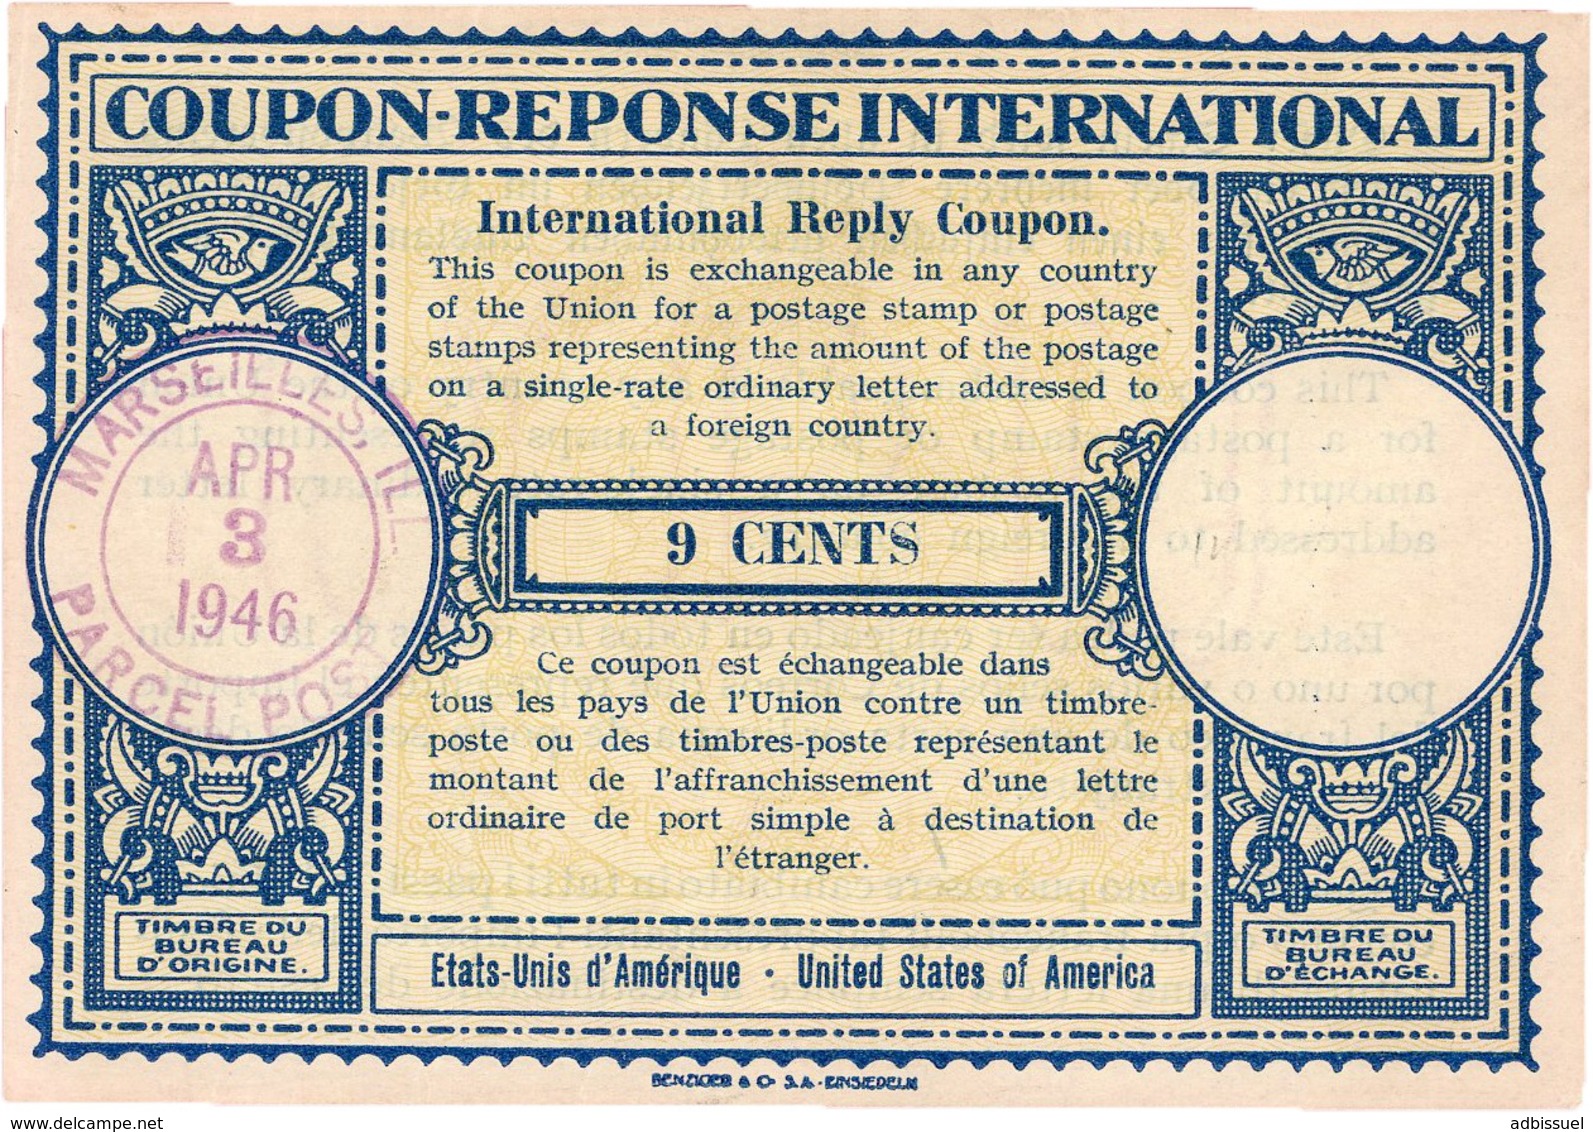 COUPON-REPONSE INTERNATIONAL USA Type Londres Obliteration Lilas "MARSEILLES ILL. PARCEL POST 3/4/46" / 9 Cents. TB - Coupons-réponse